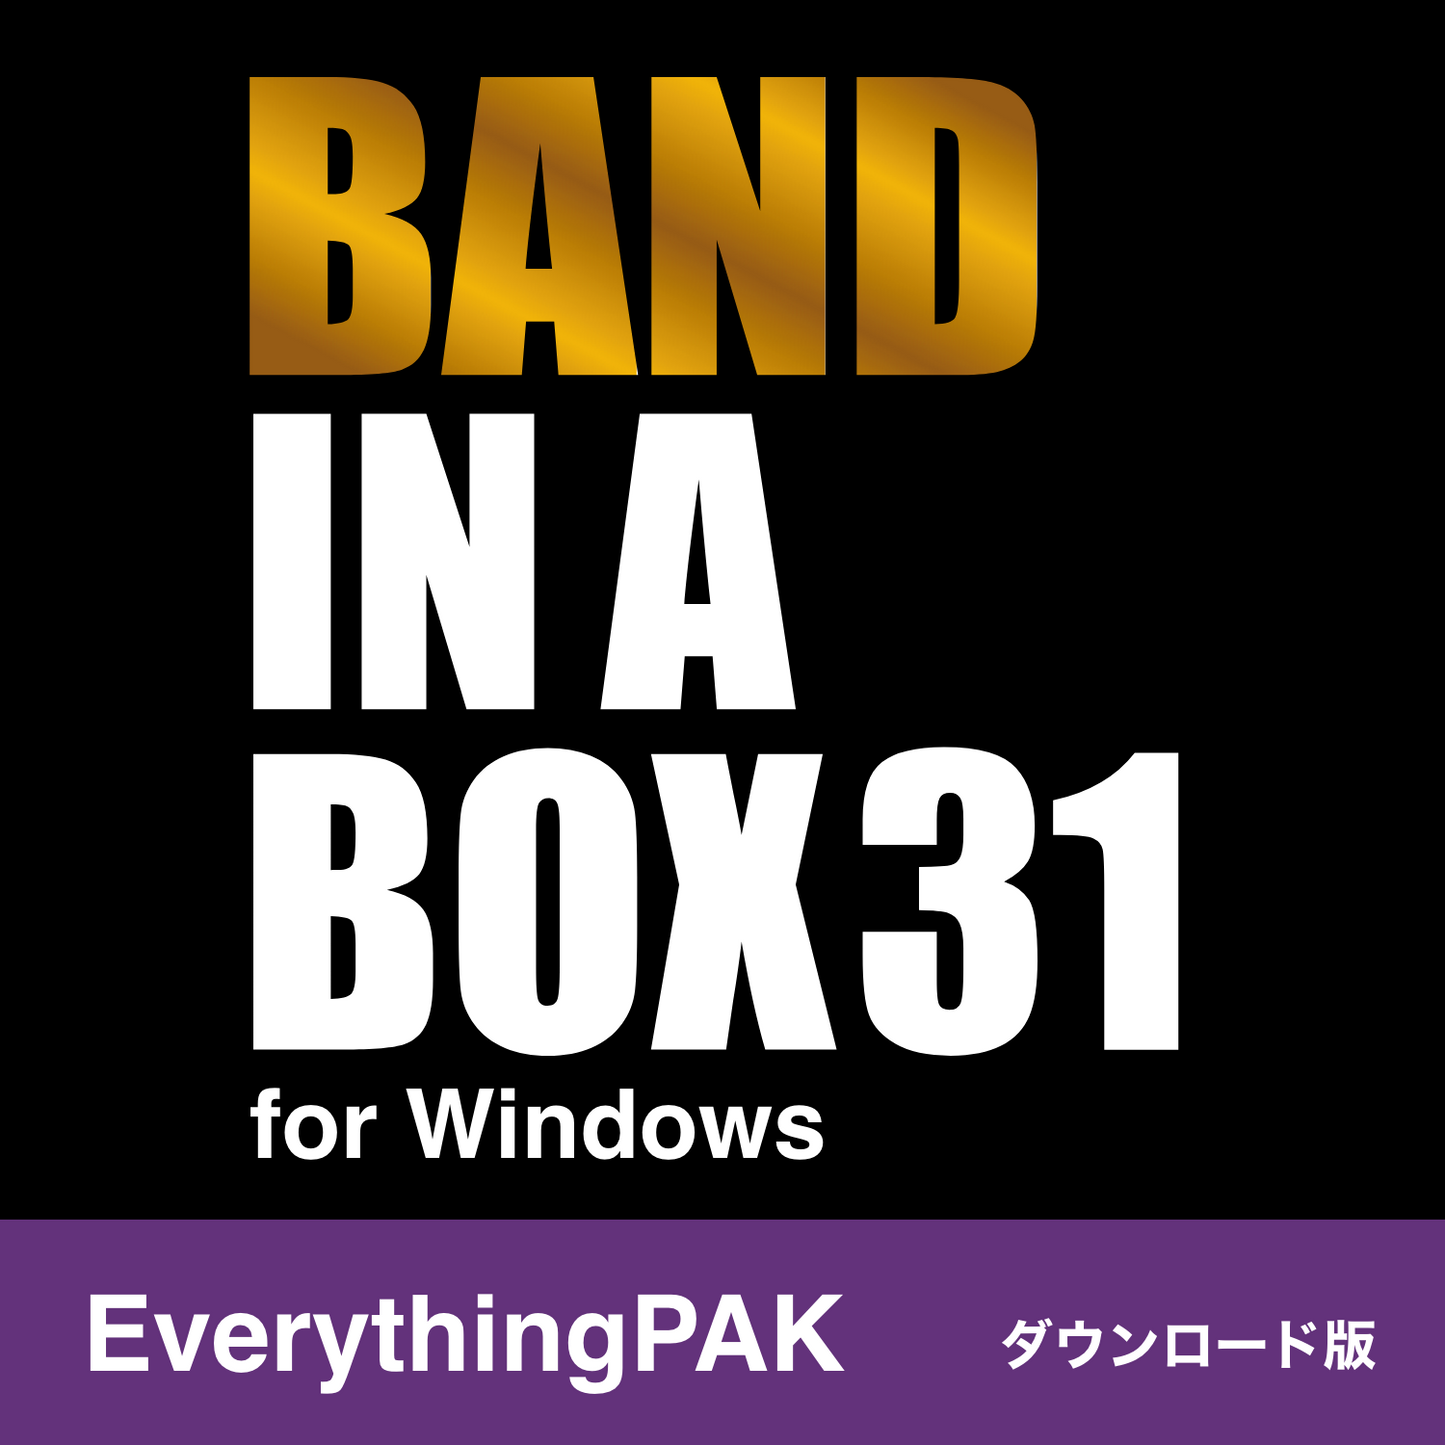 Band-in-a-Box 31 for Win【ダウンロード版】